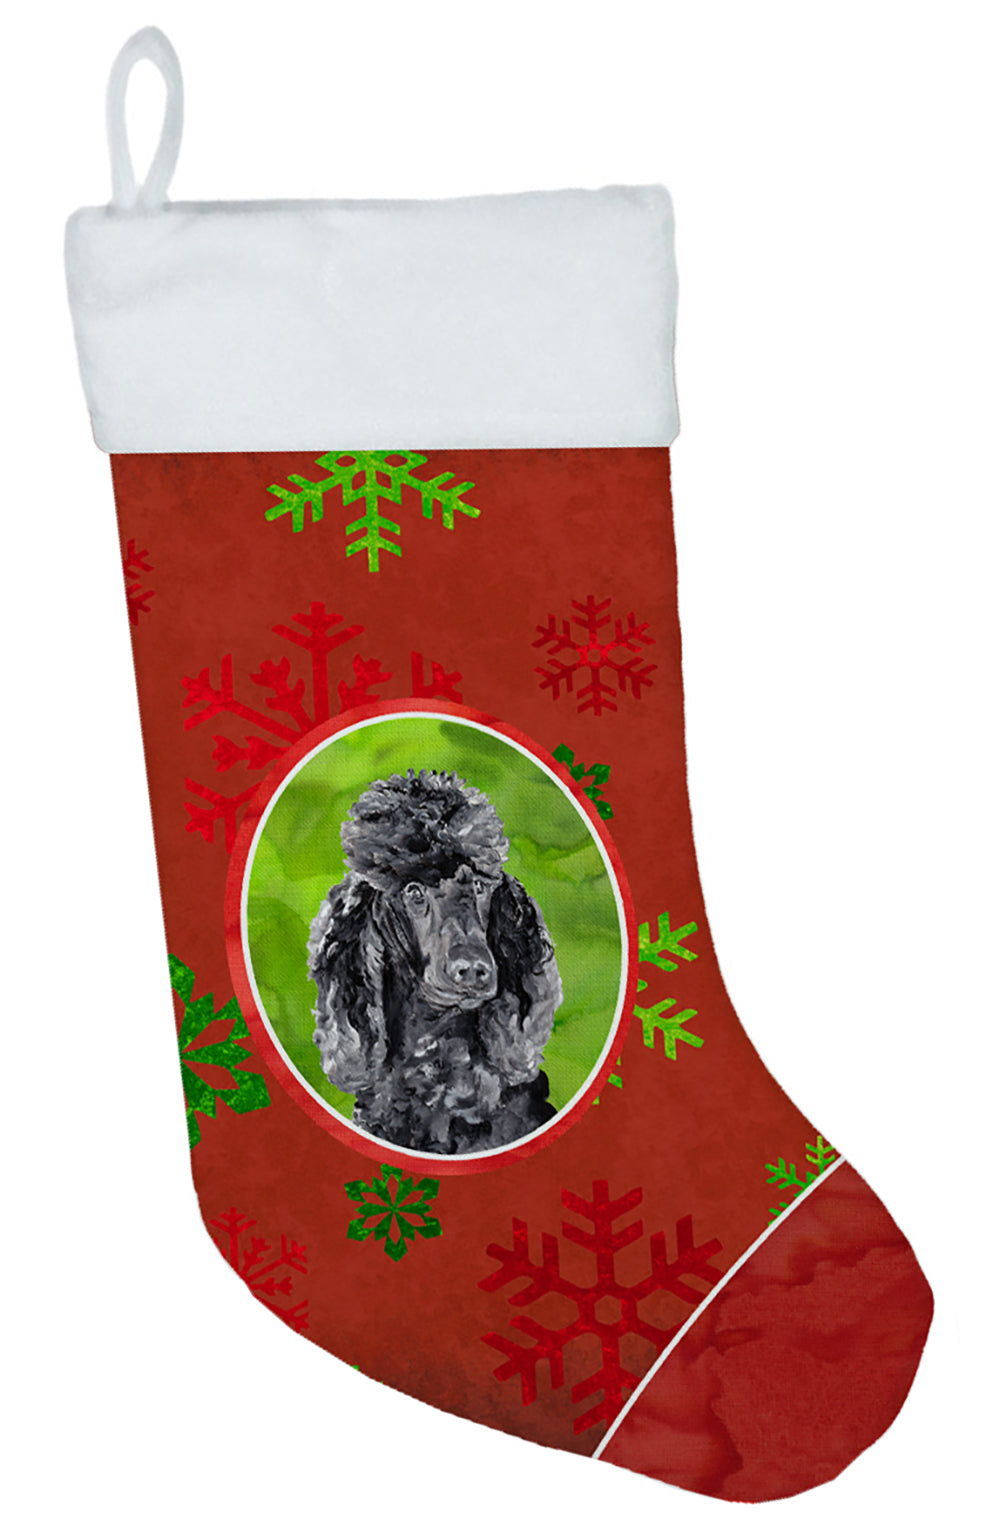 Black Standard Poodle Red Snowflakes Holiday Christmas Stocking